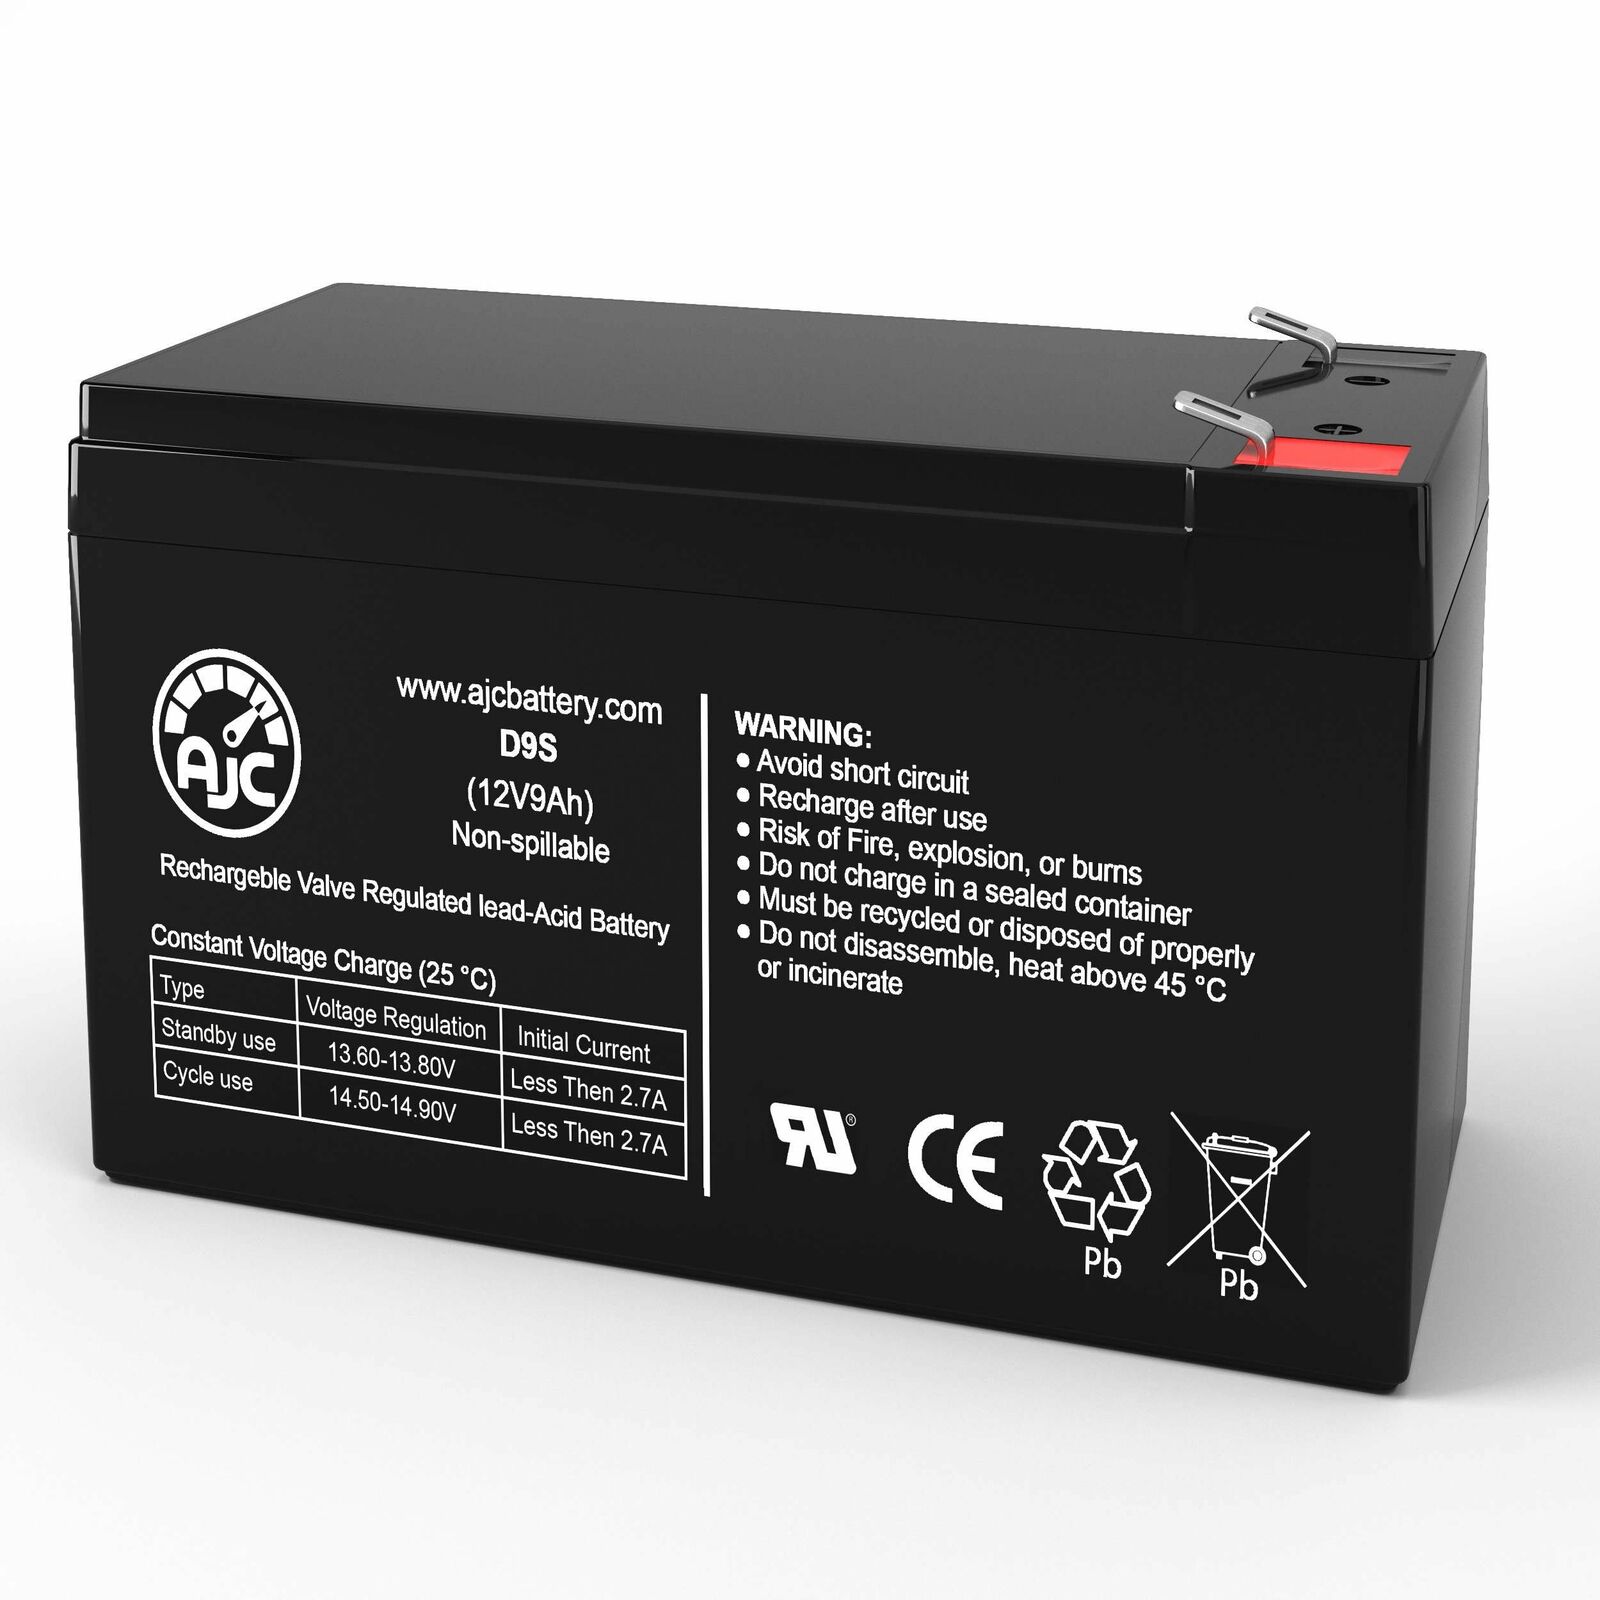 CyberPower Intelligent LCD 1350VA 8-Outlet 12V 9Ah UPS Replacement Battery